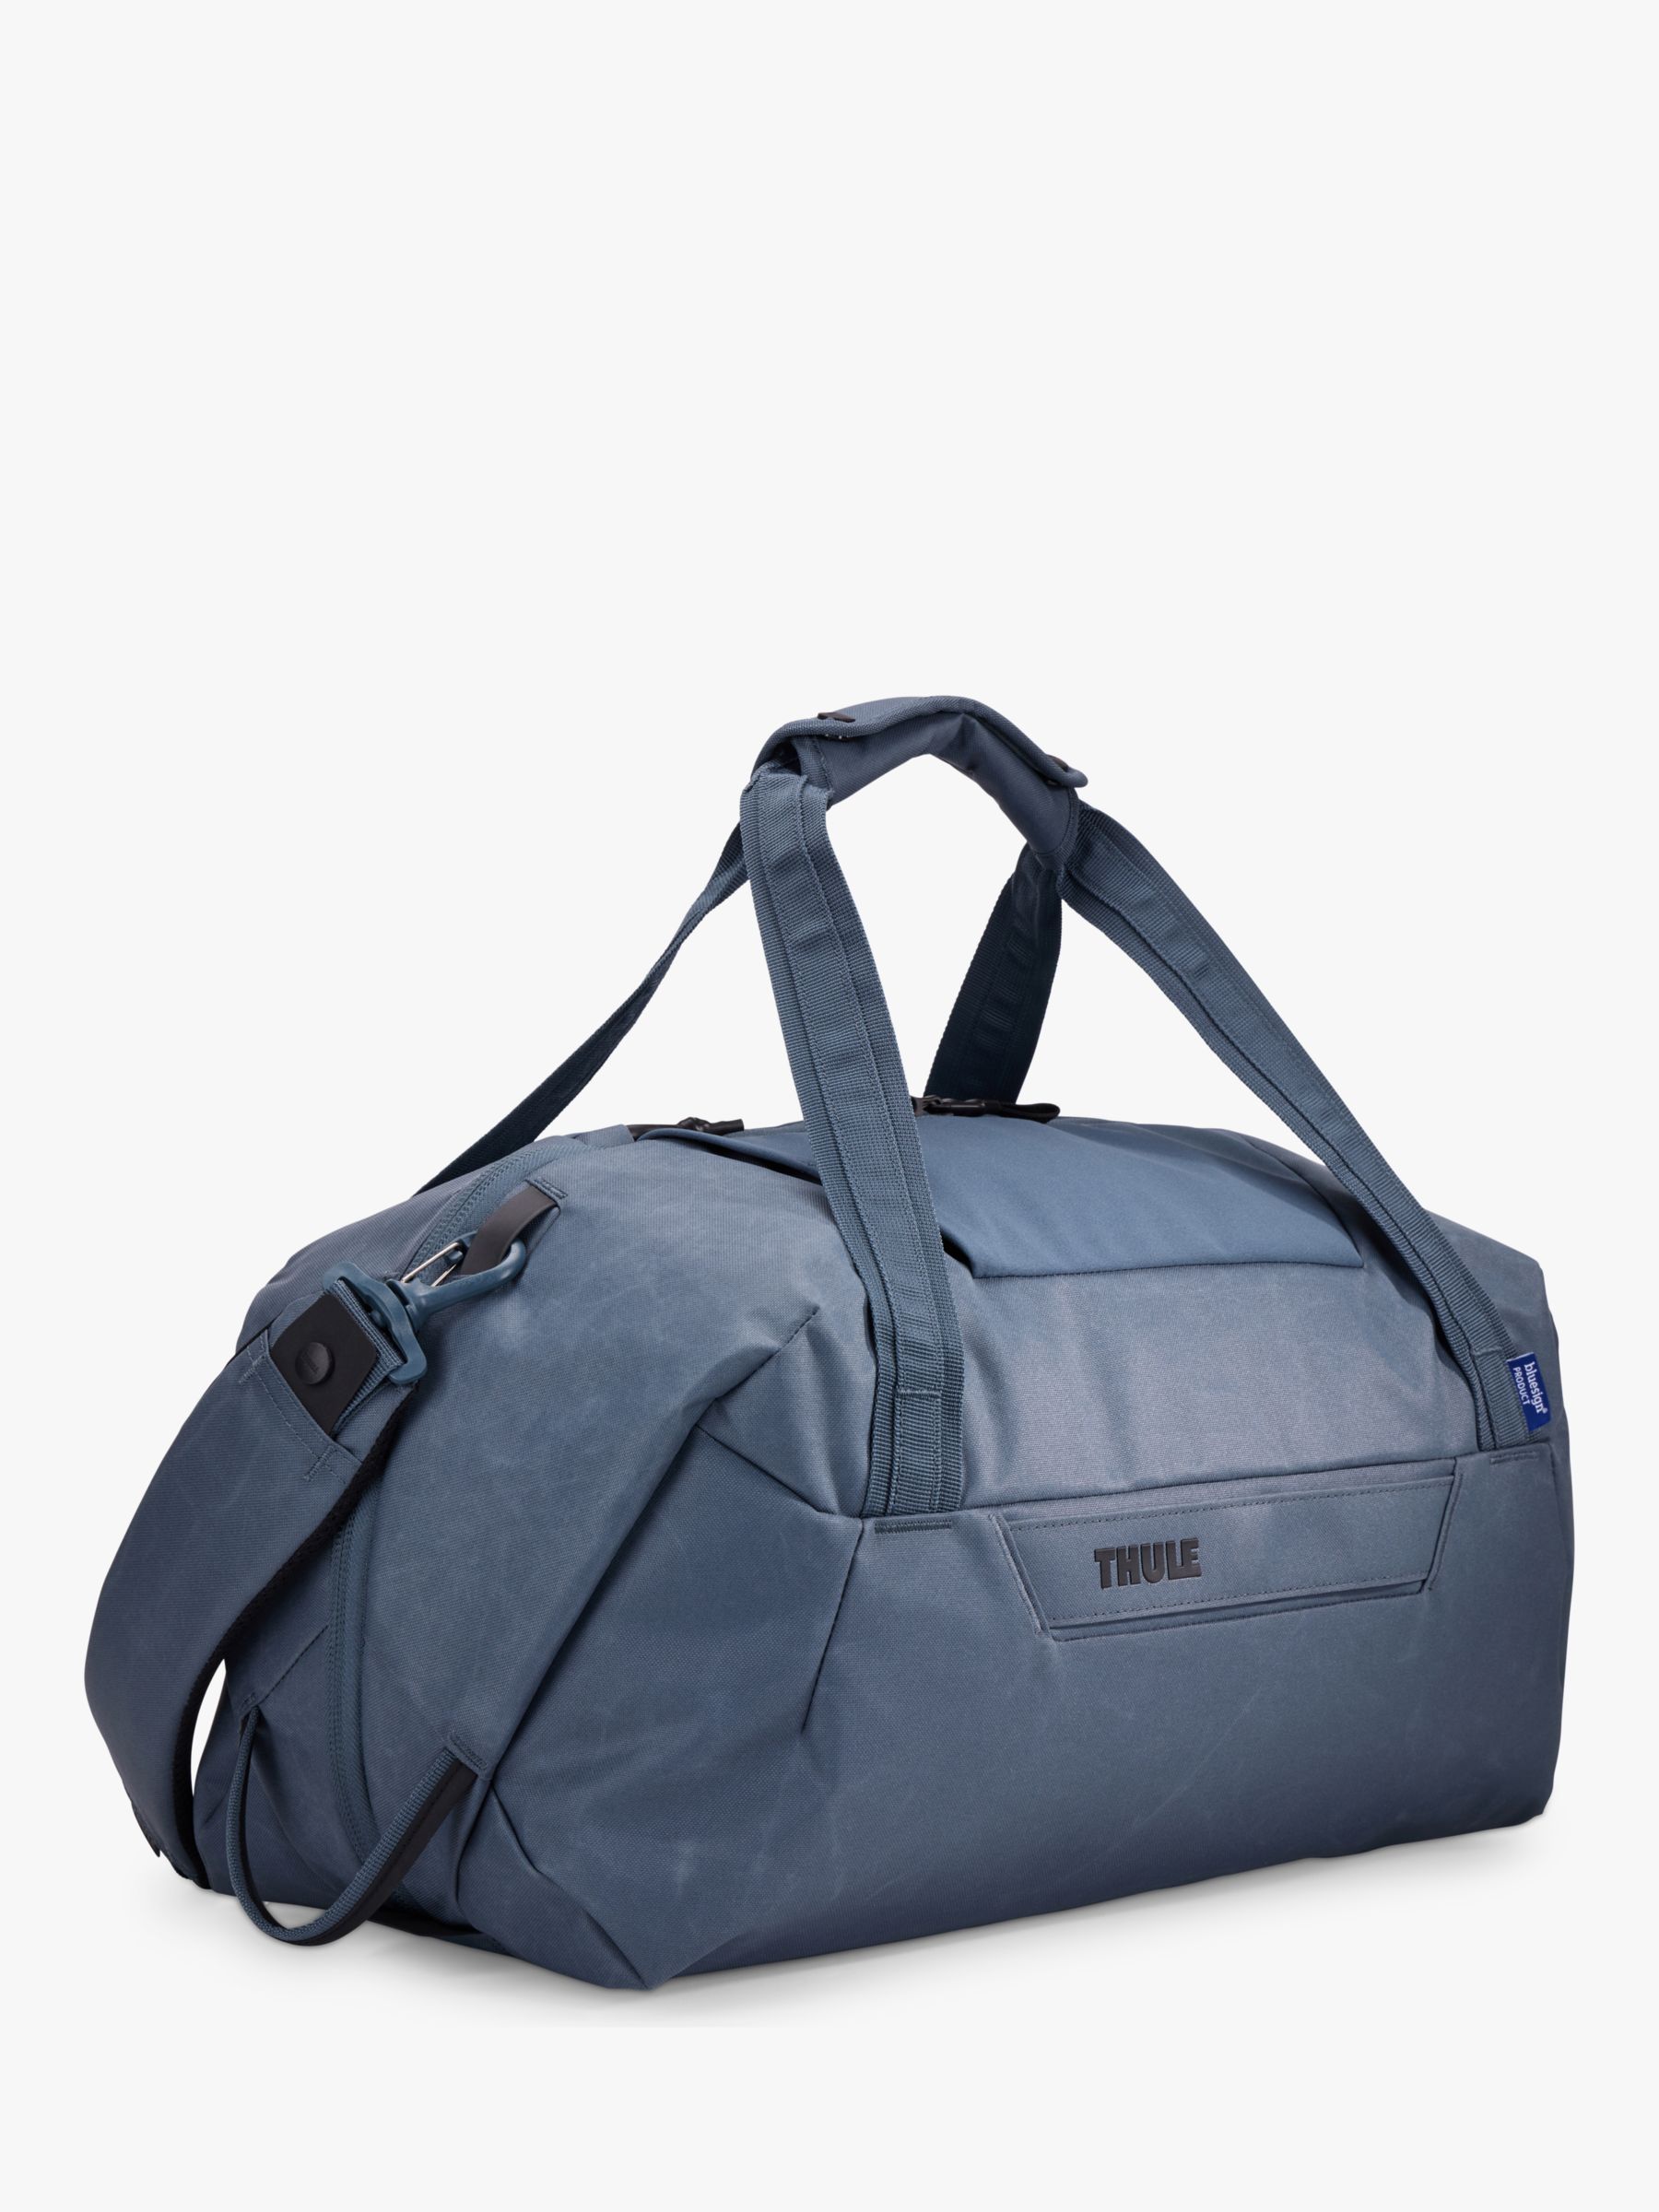 Thule Aion 35L Recycled Duffel Bag